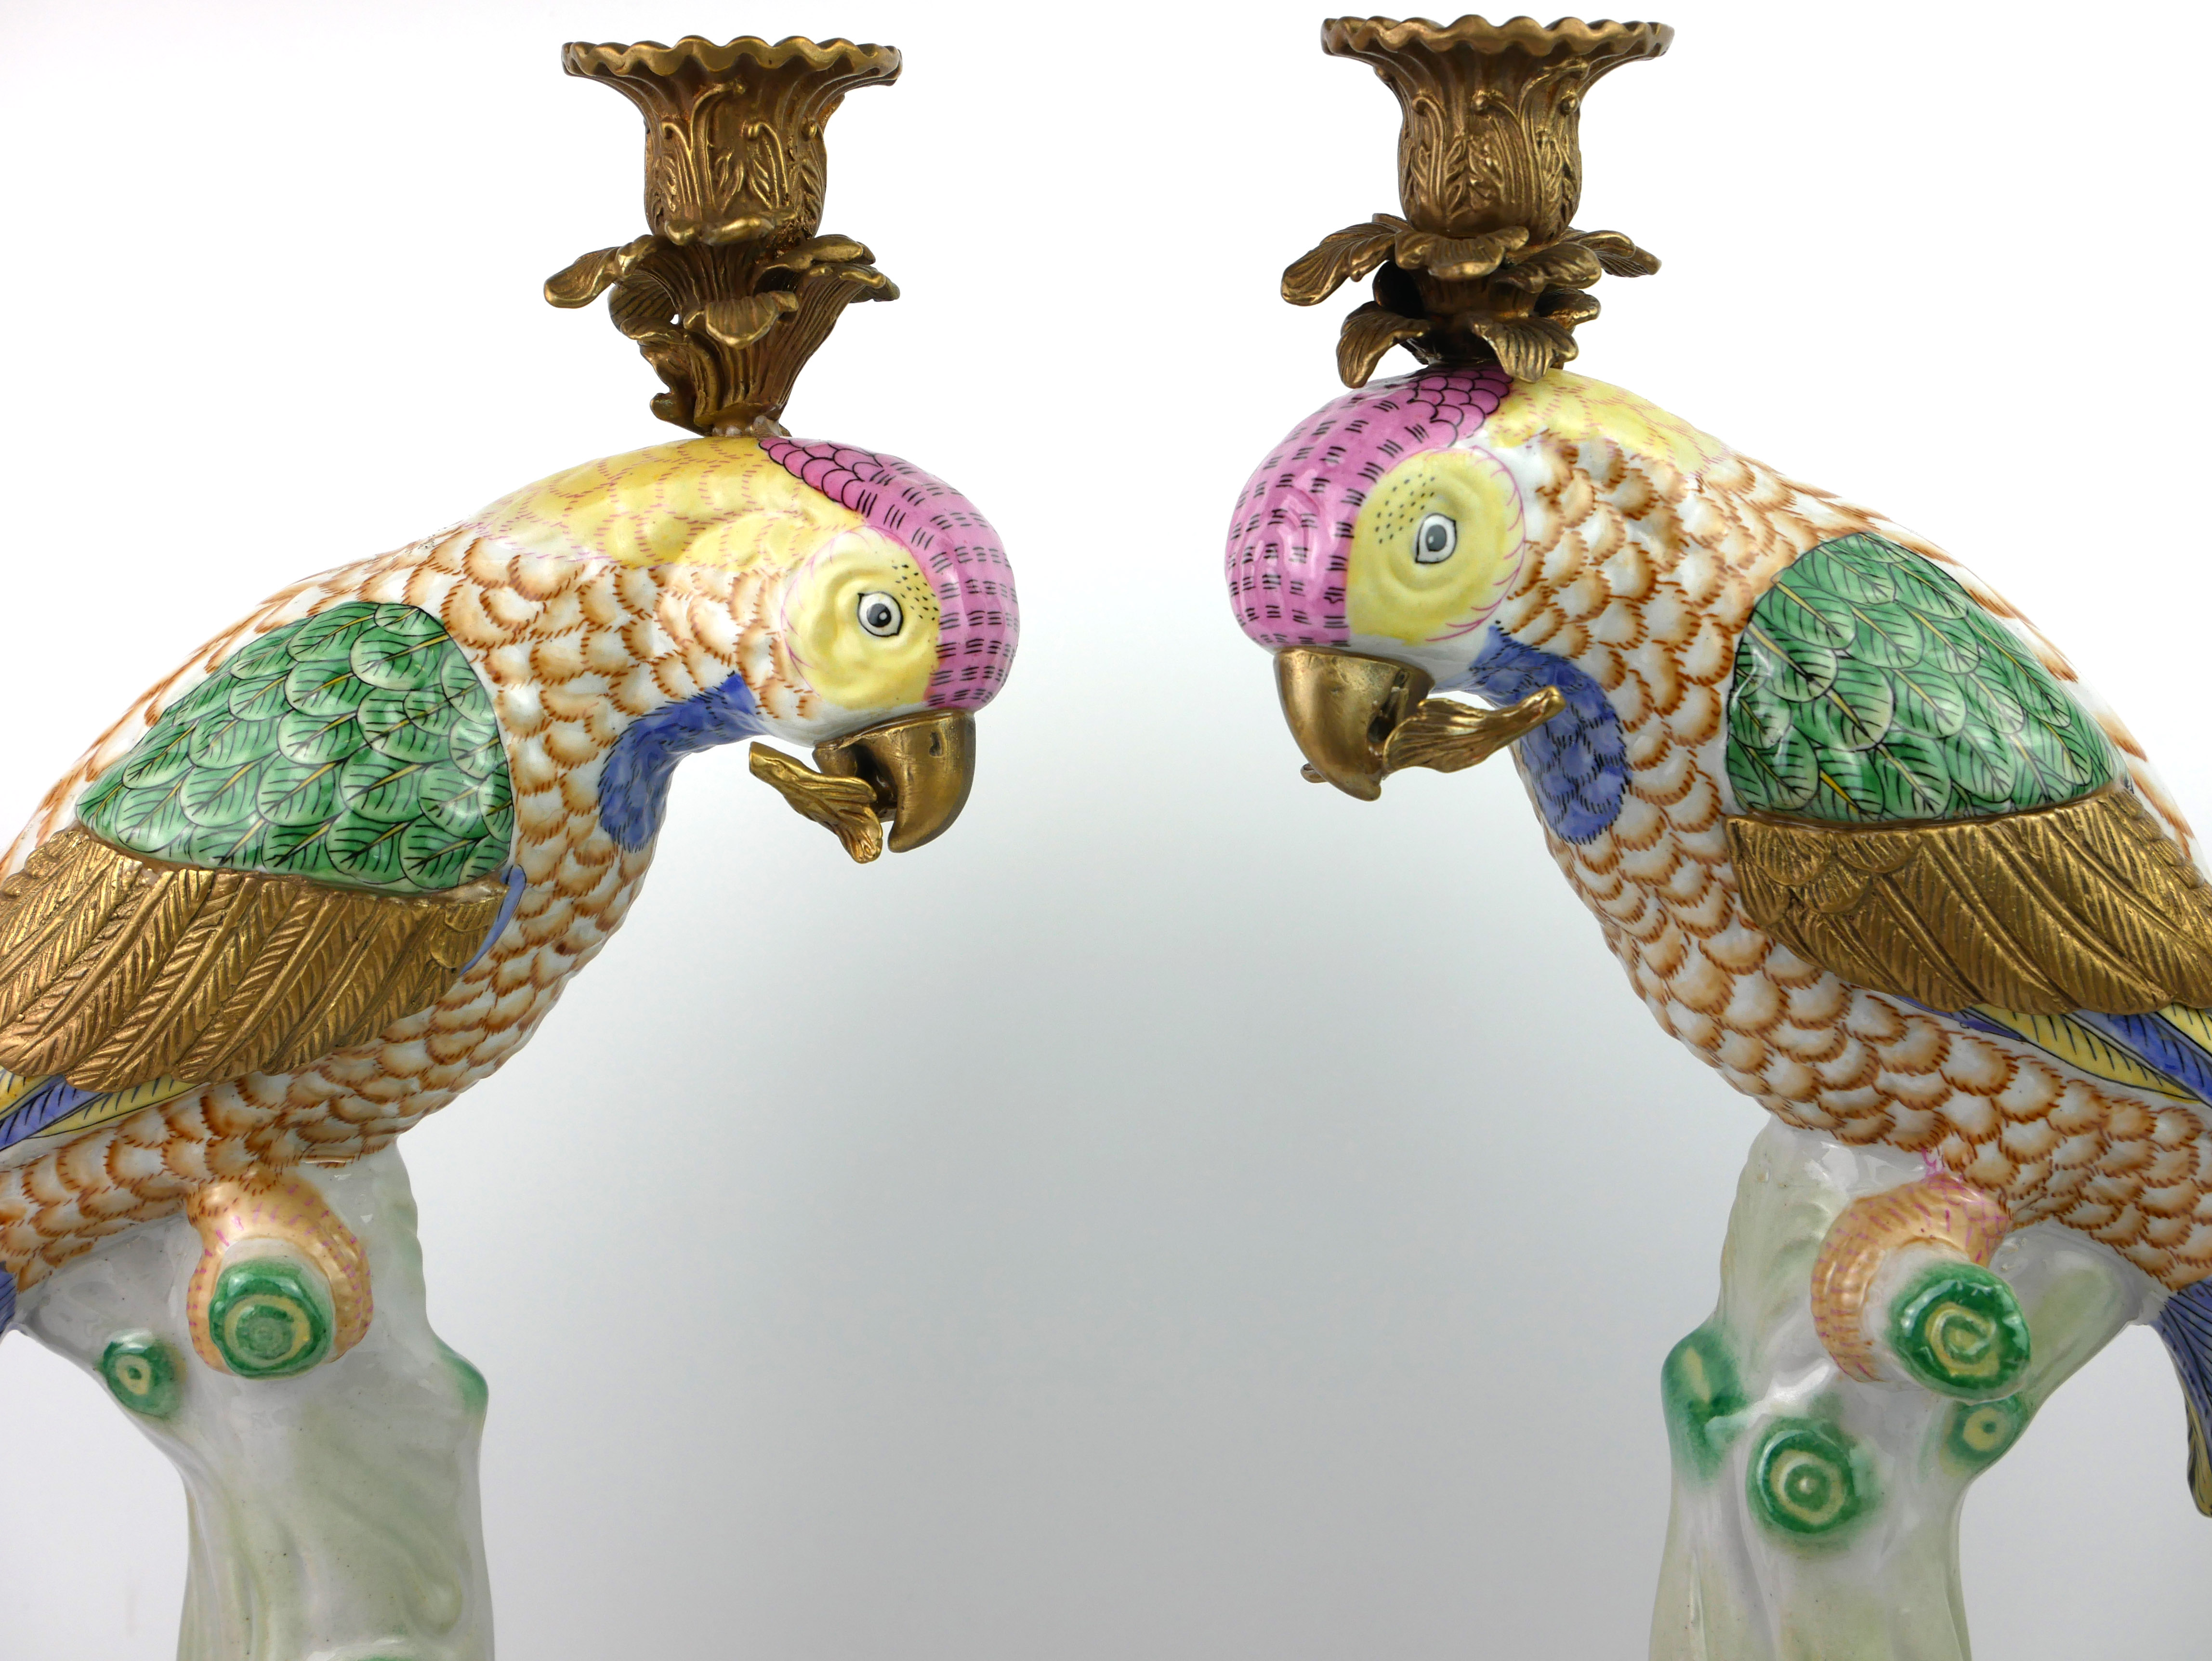 A PAIR OF DECORATIVE 20TH CENTURY PORCELAIN BASED MODELS OF EXOTIC PARROTS MODELLED AS TABLE - Image 2 of 4